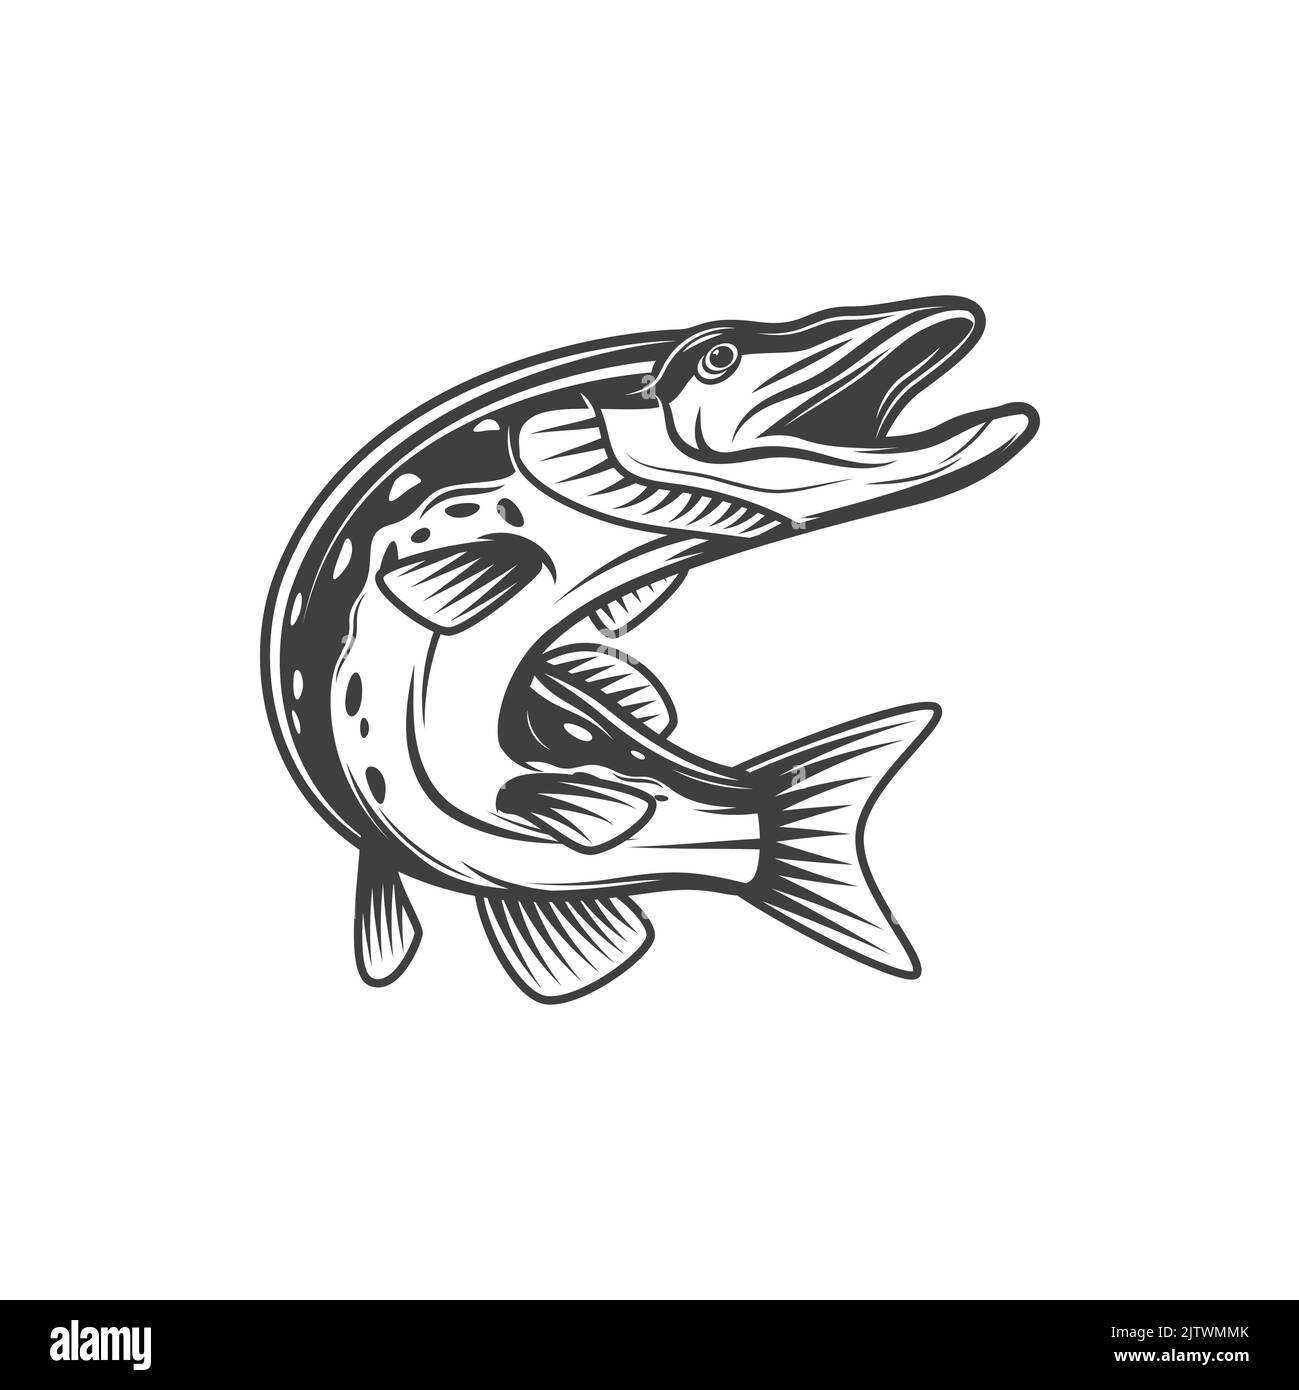 Pike fish or freshwater pickerel and walleye, vector isolated icon. Freshwater and marine fish, food and fishing pike or pickerel walleye, fishery market catch Stock Vector